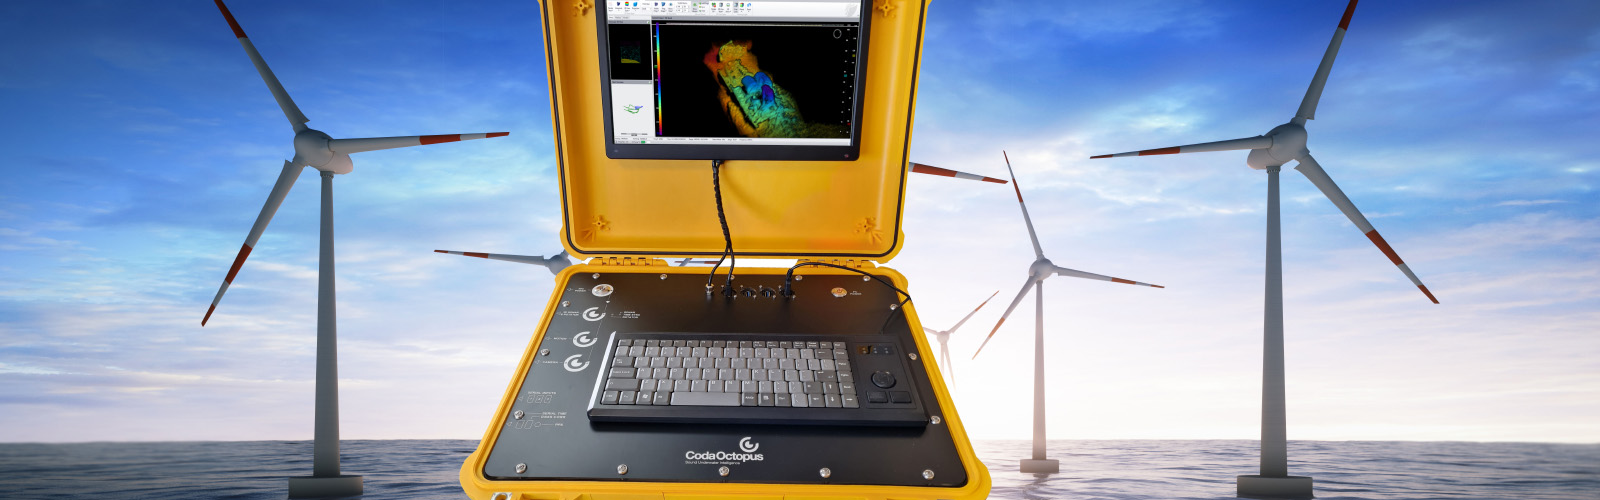 3D sonar technology control system for under and above water environments.